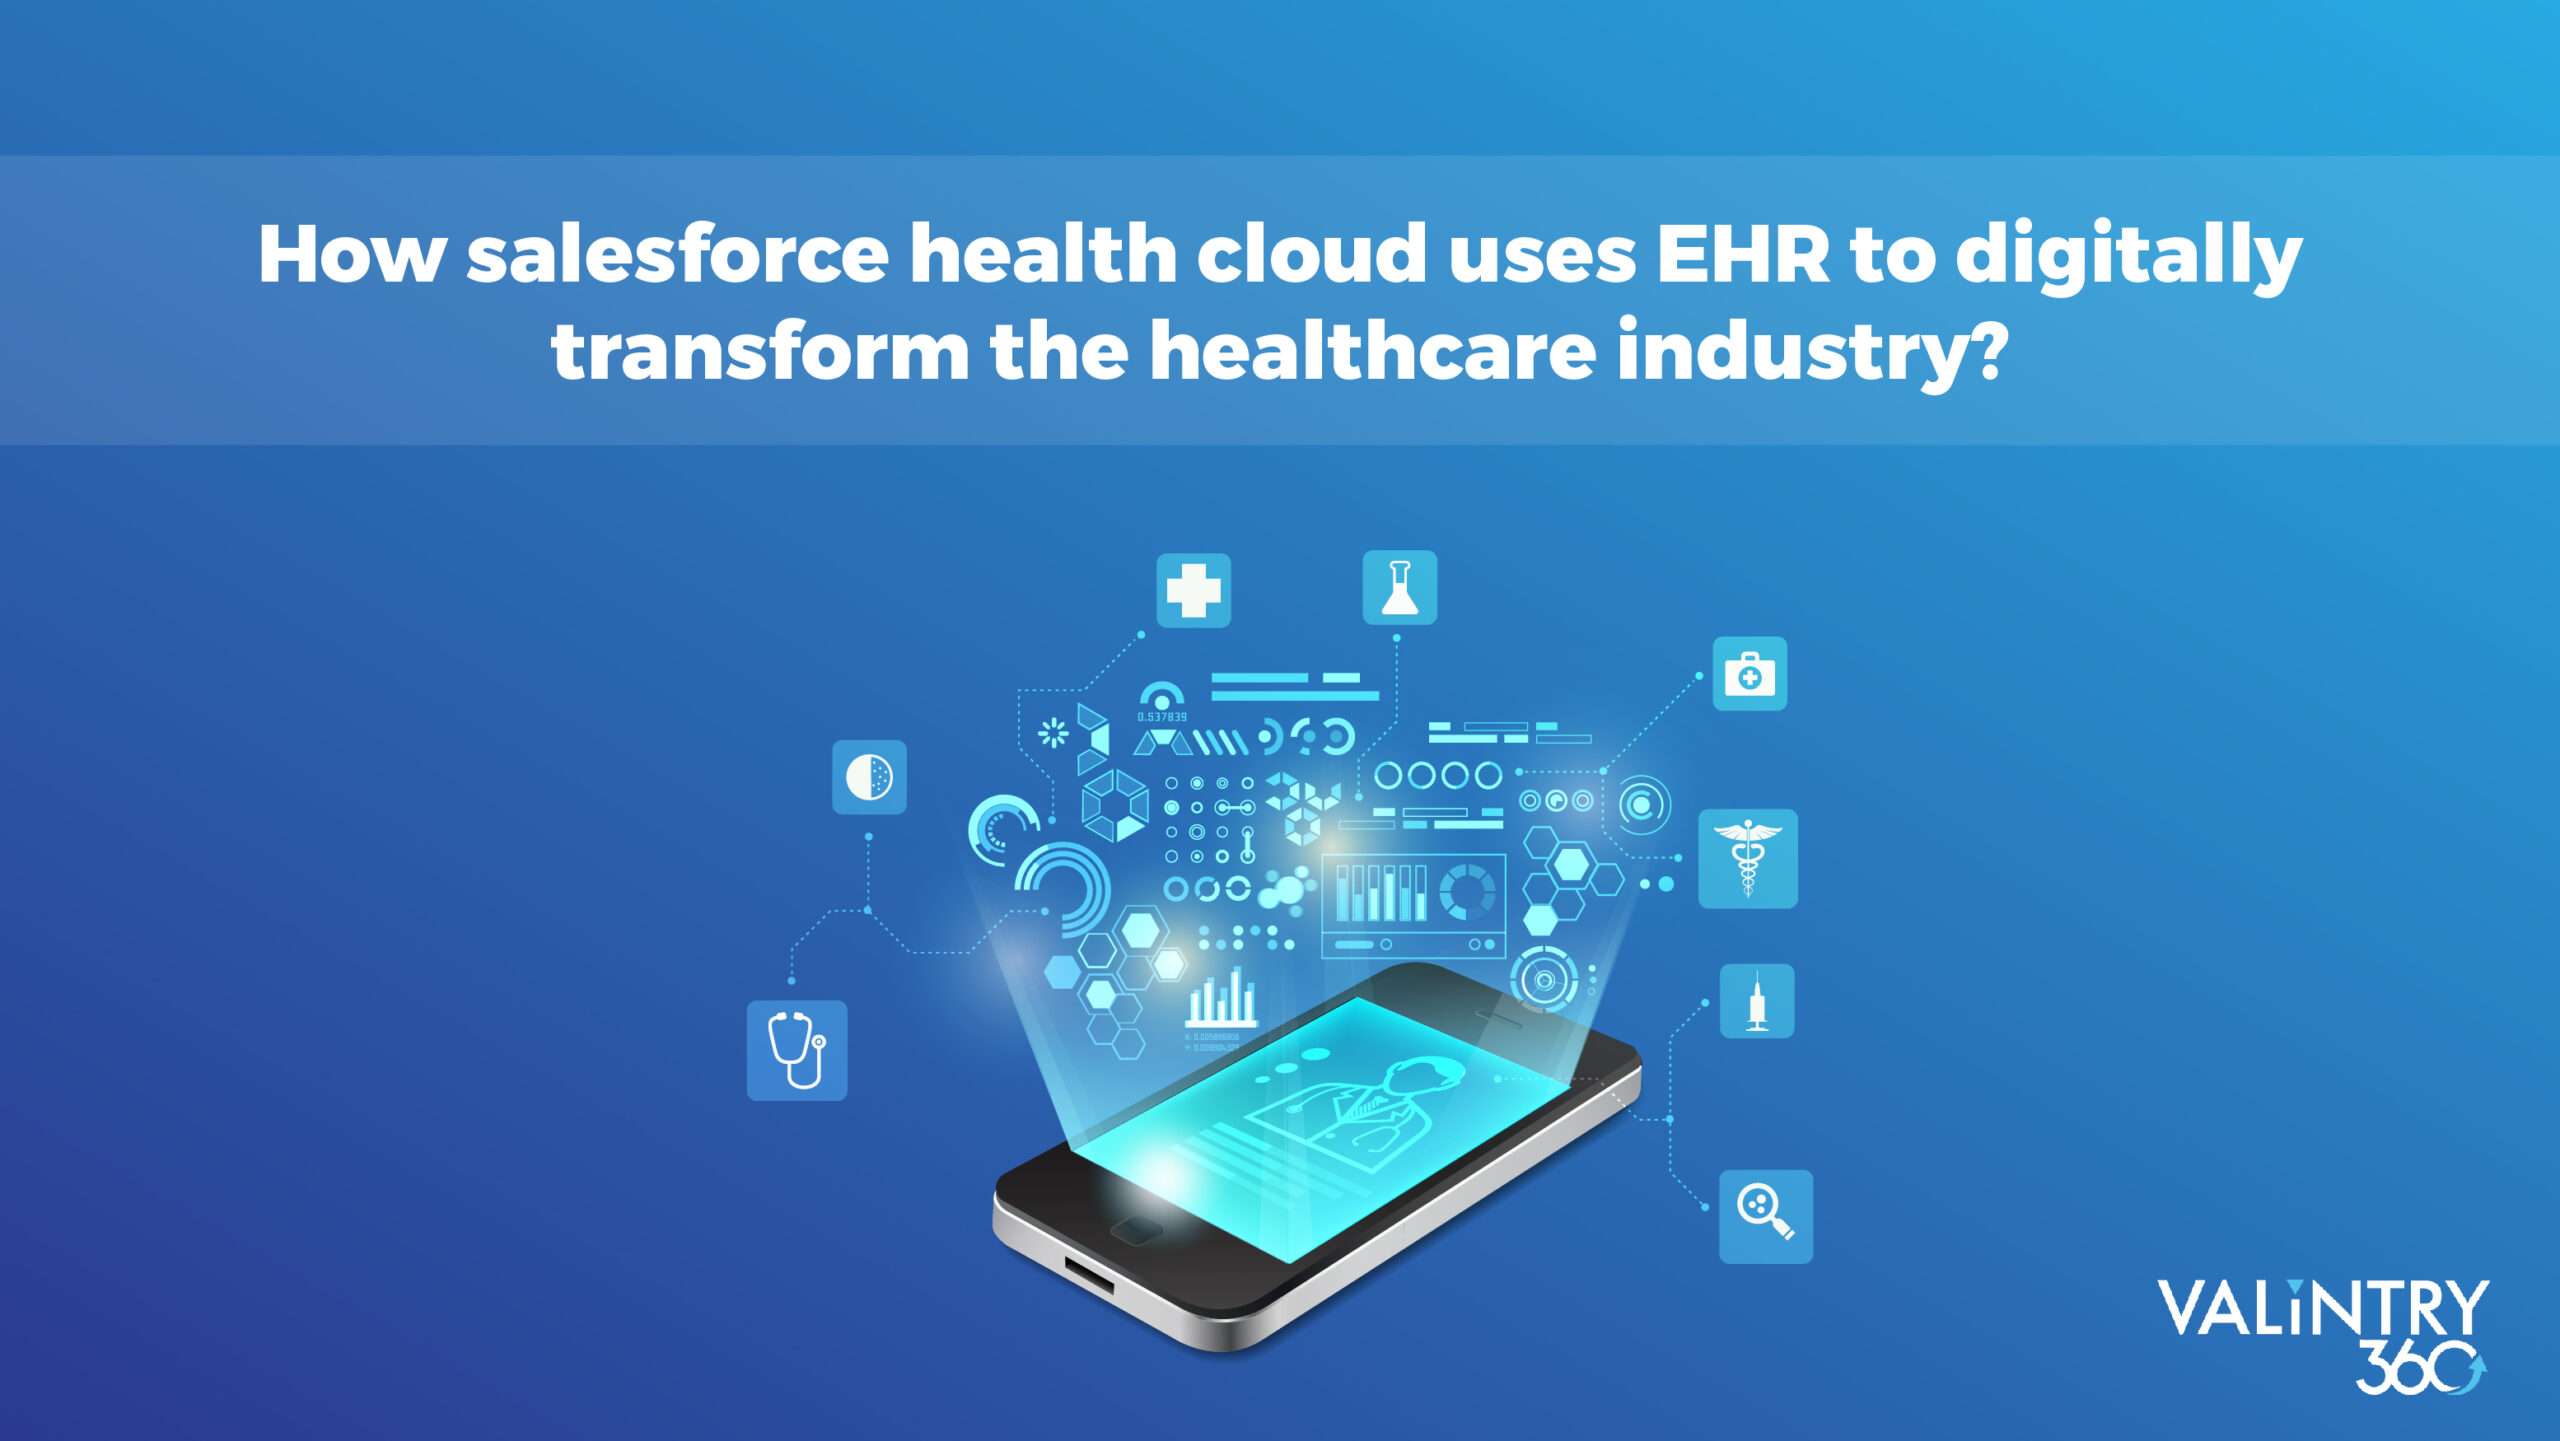 How Salesforce HealthCloud uses EHR to digitally transform